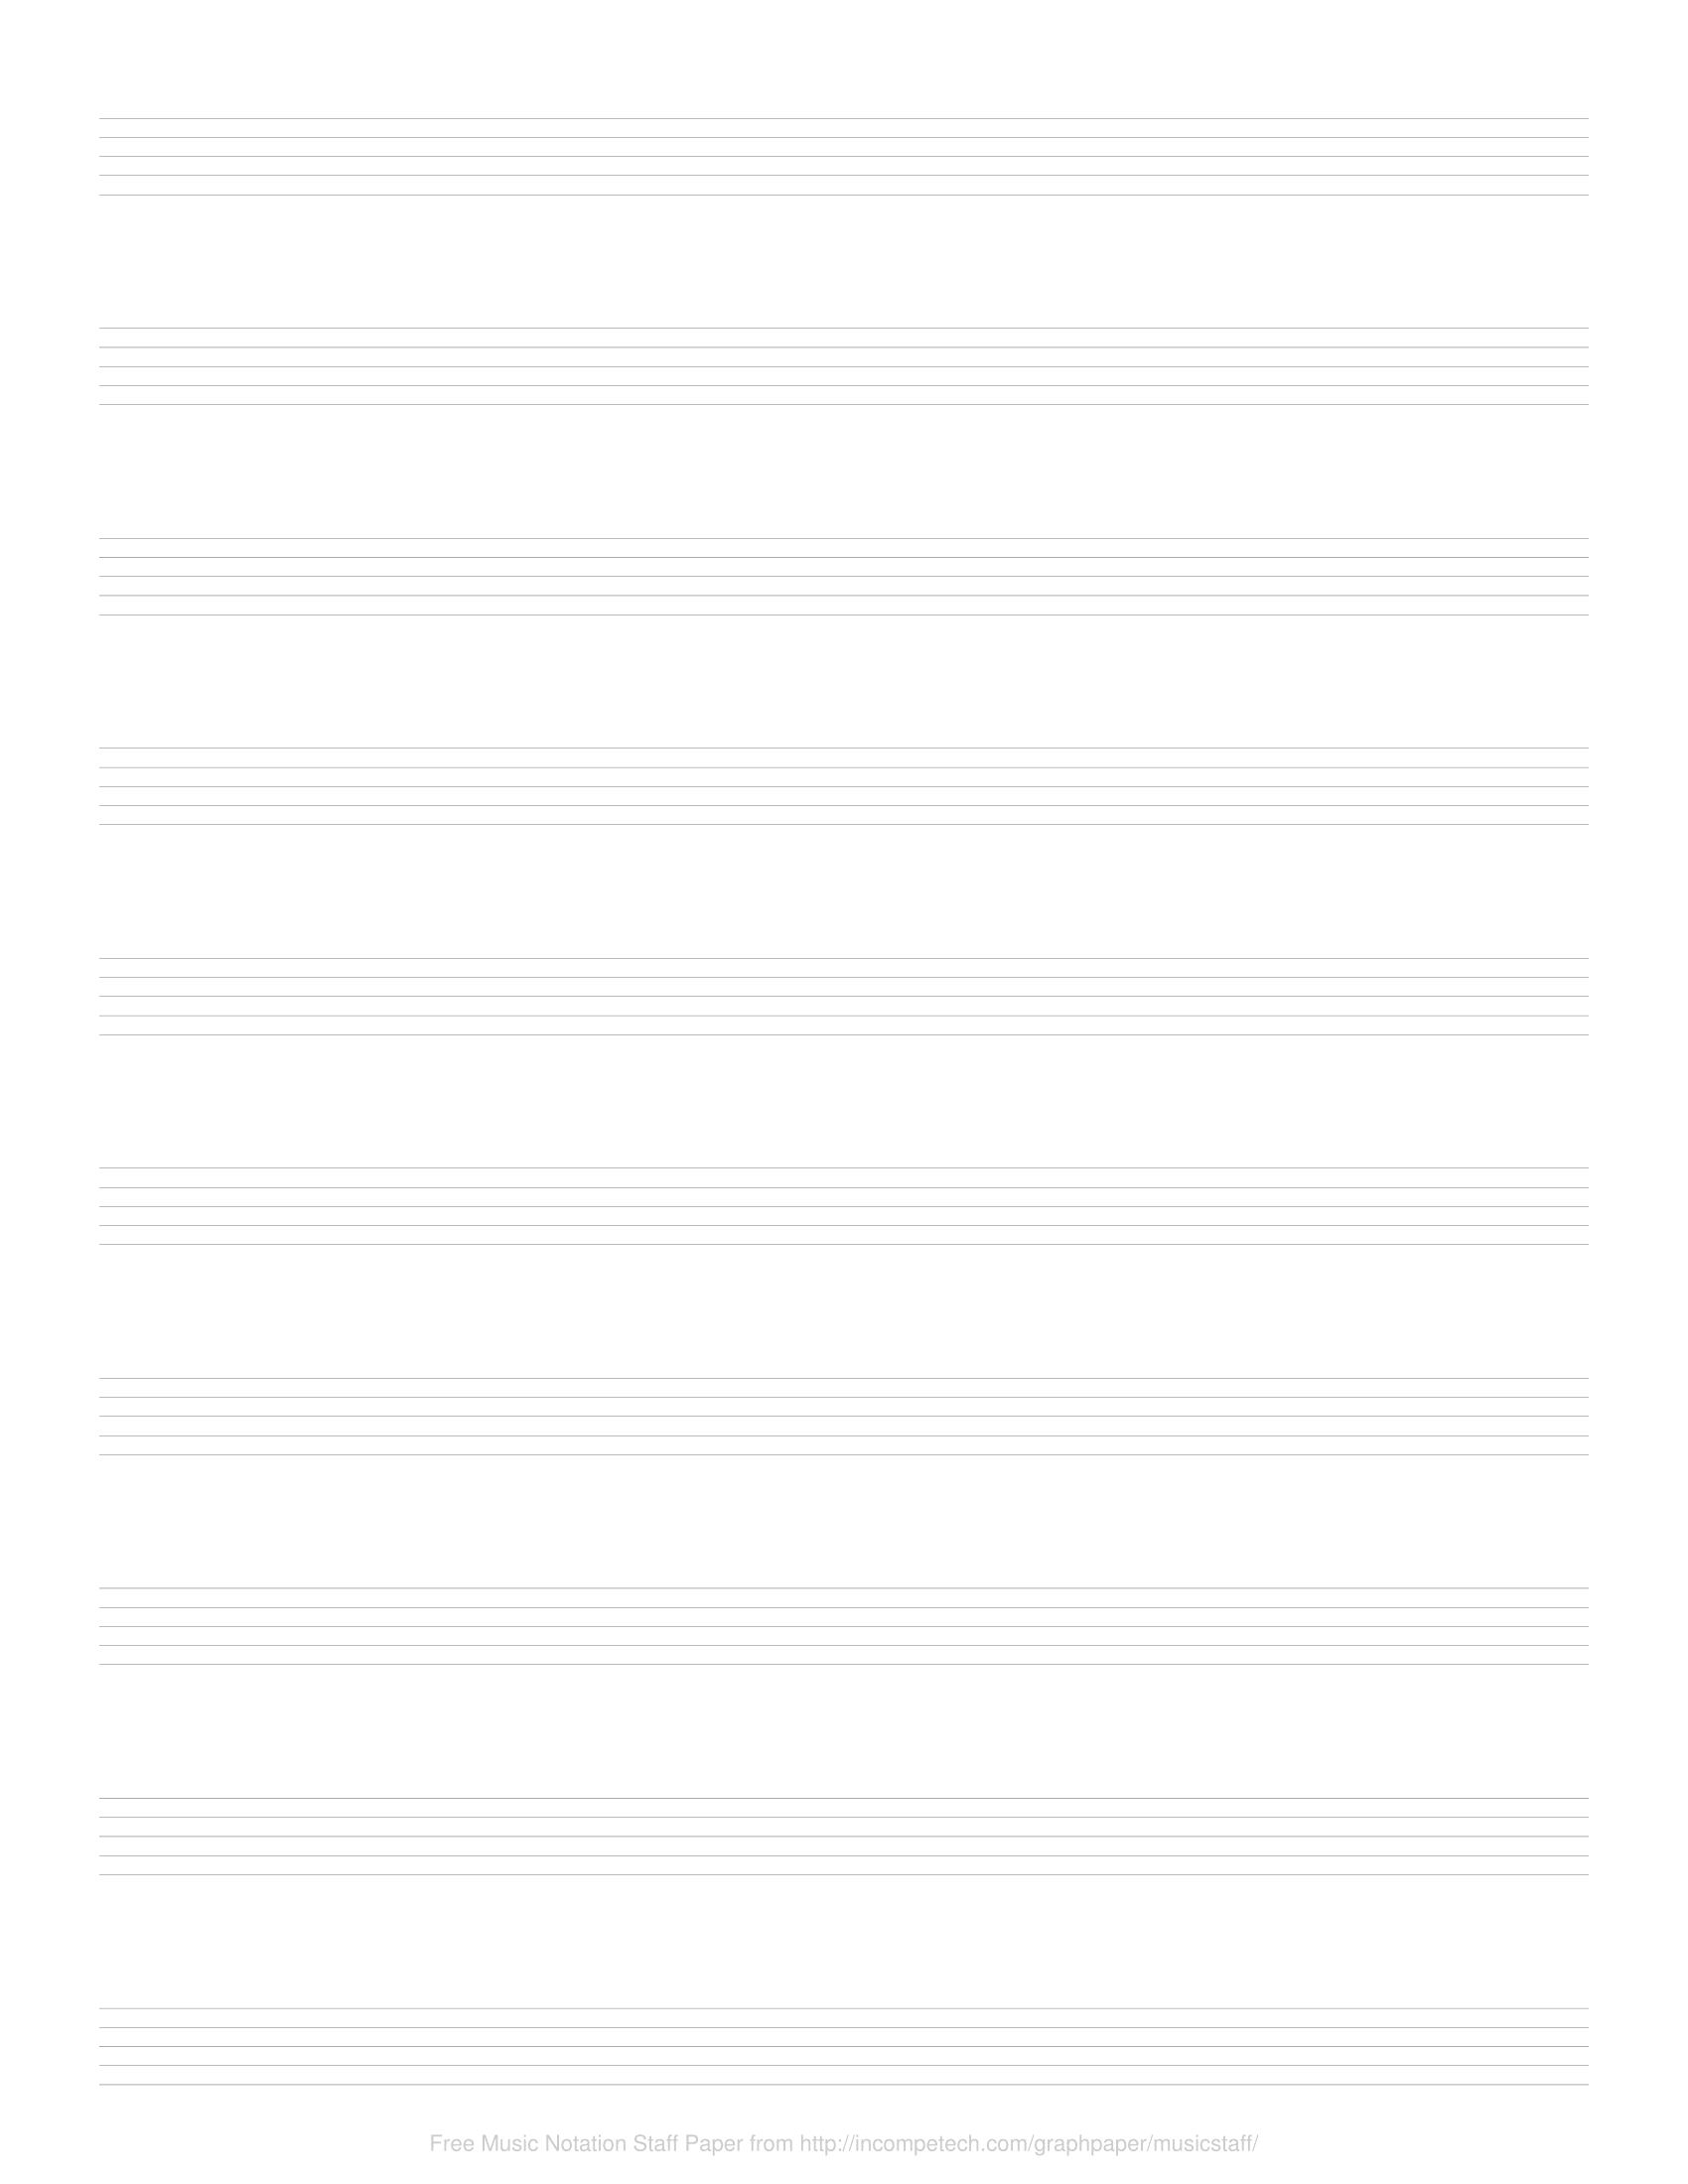 Free Online Graph Paper / Music Notation - Free Printable Staff Paper